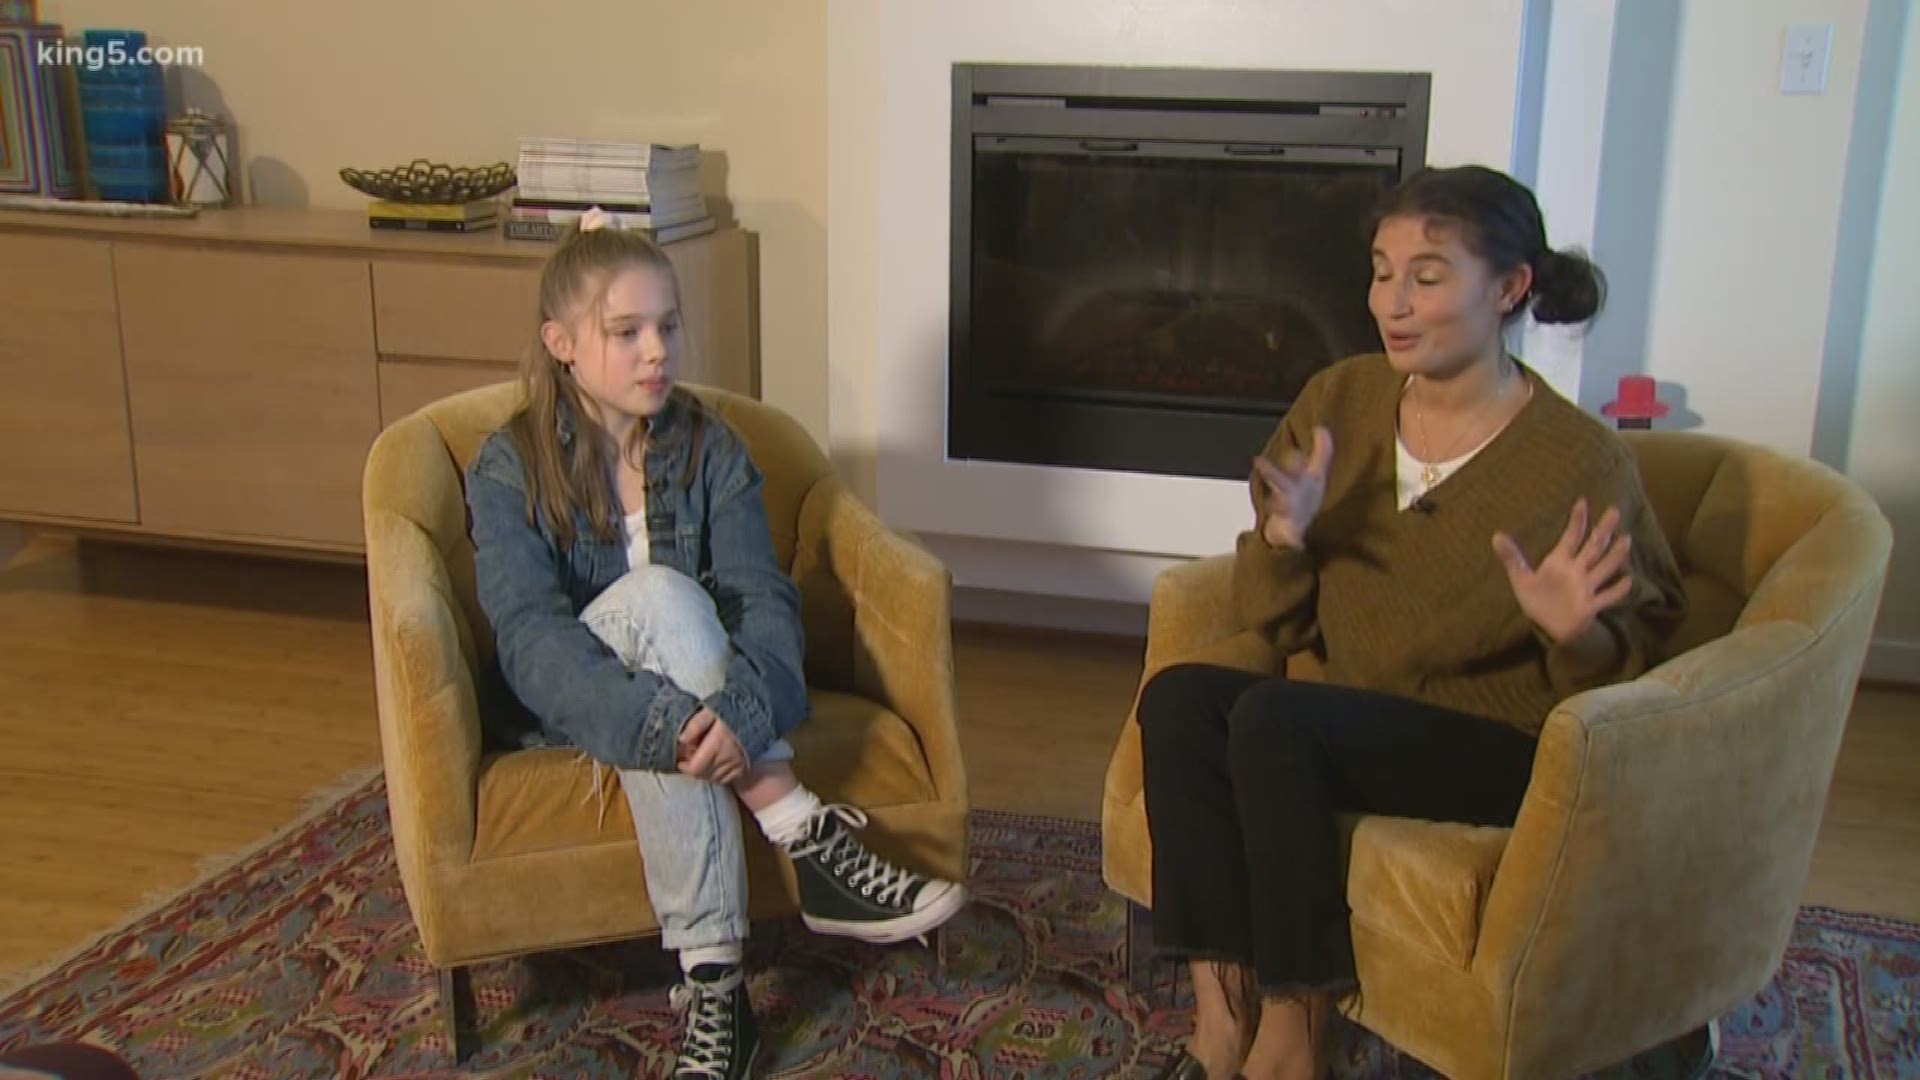 Reann Taylor and her daughter Evangeline are home safe and sound with help from the community, after being caught downtown during the Seattle shooting.